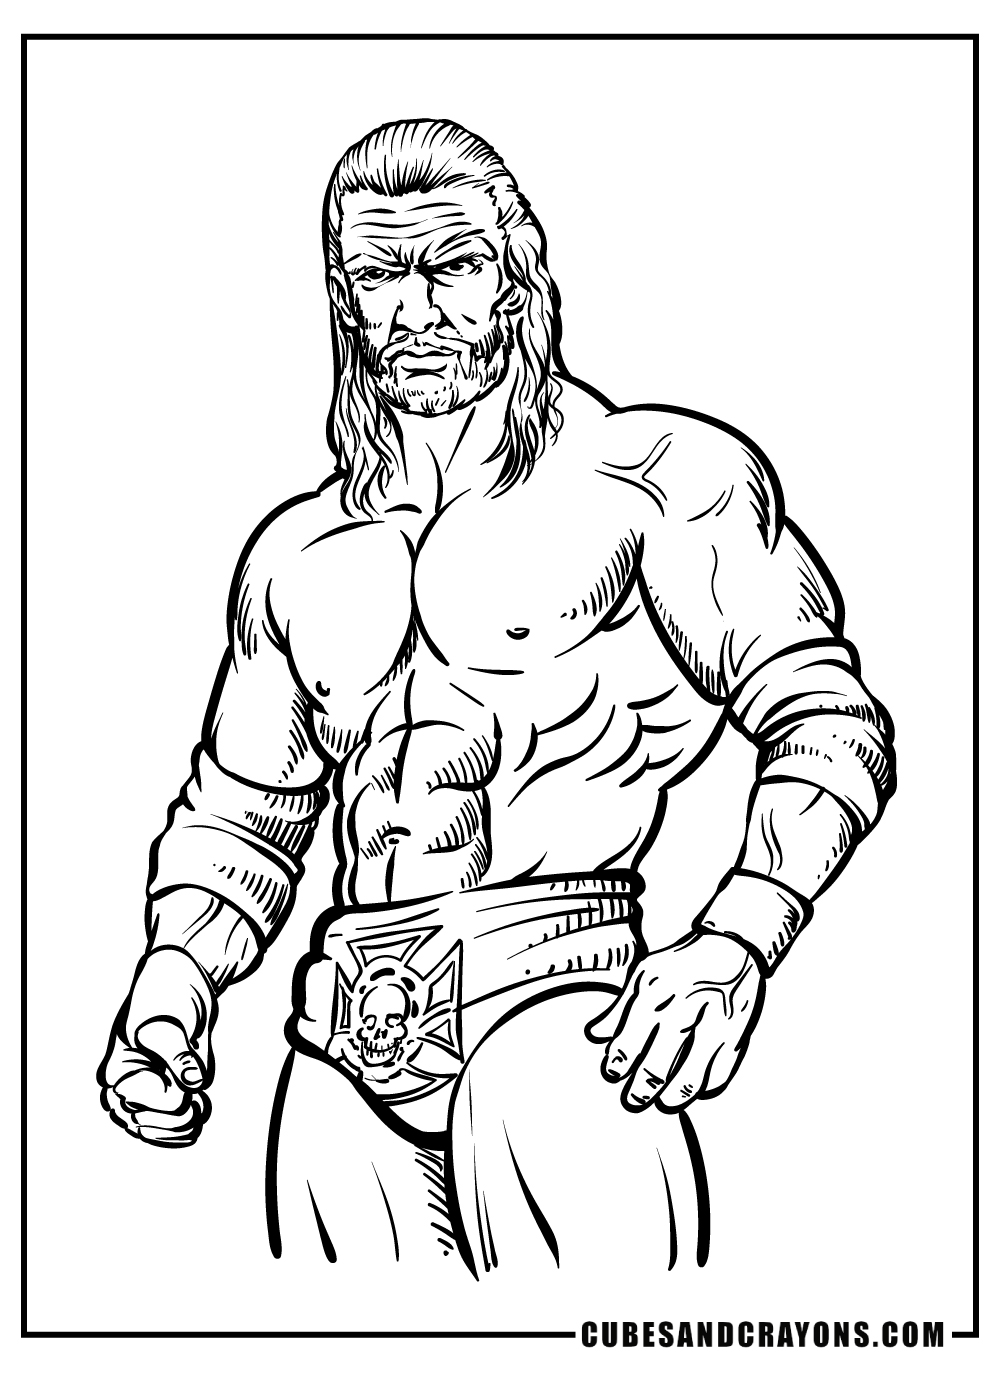 WWE Coloring Pages for preschoolers free printable